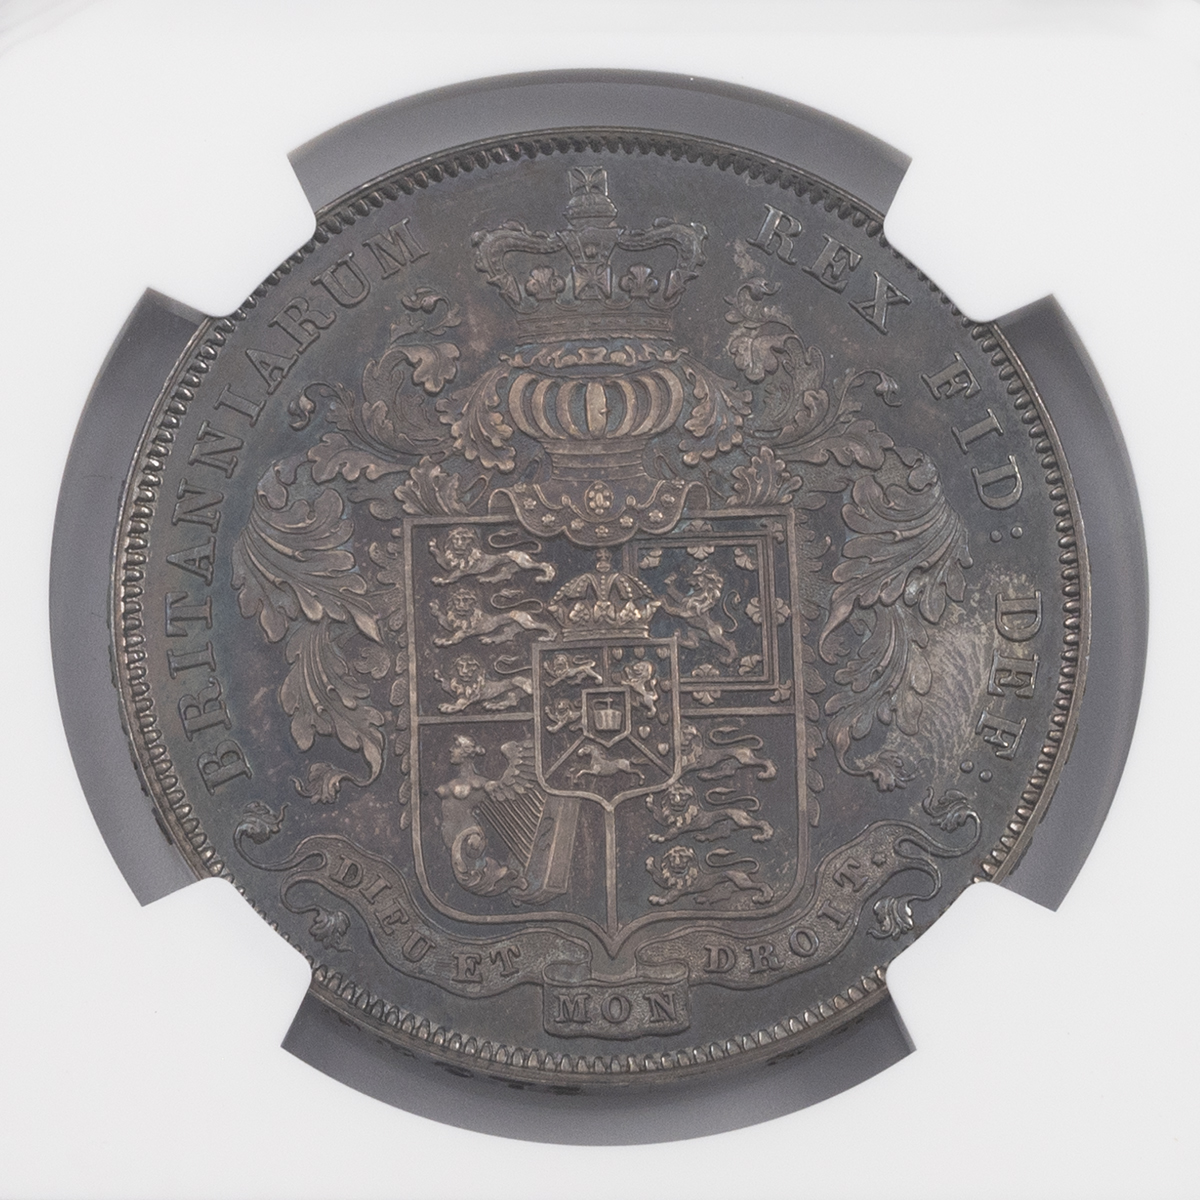 1826 proof Crown of King George IV, ex Norweb collection, graded PF 64 by NGC (S 3806, Bull 2336)... - Image 4 of 4